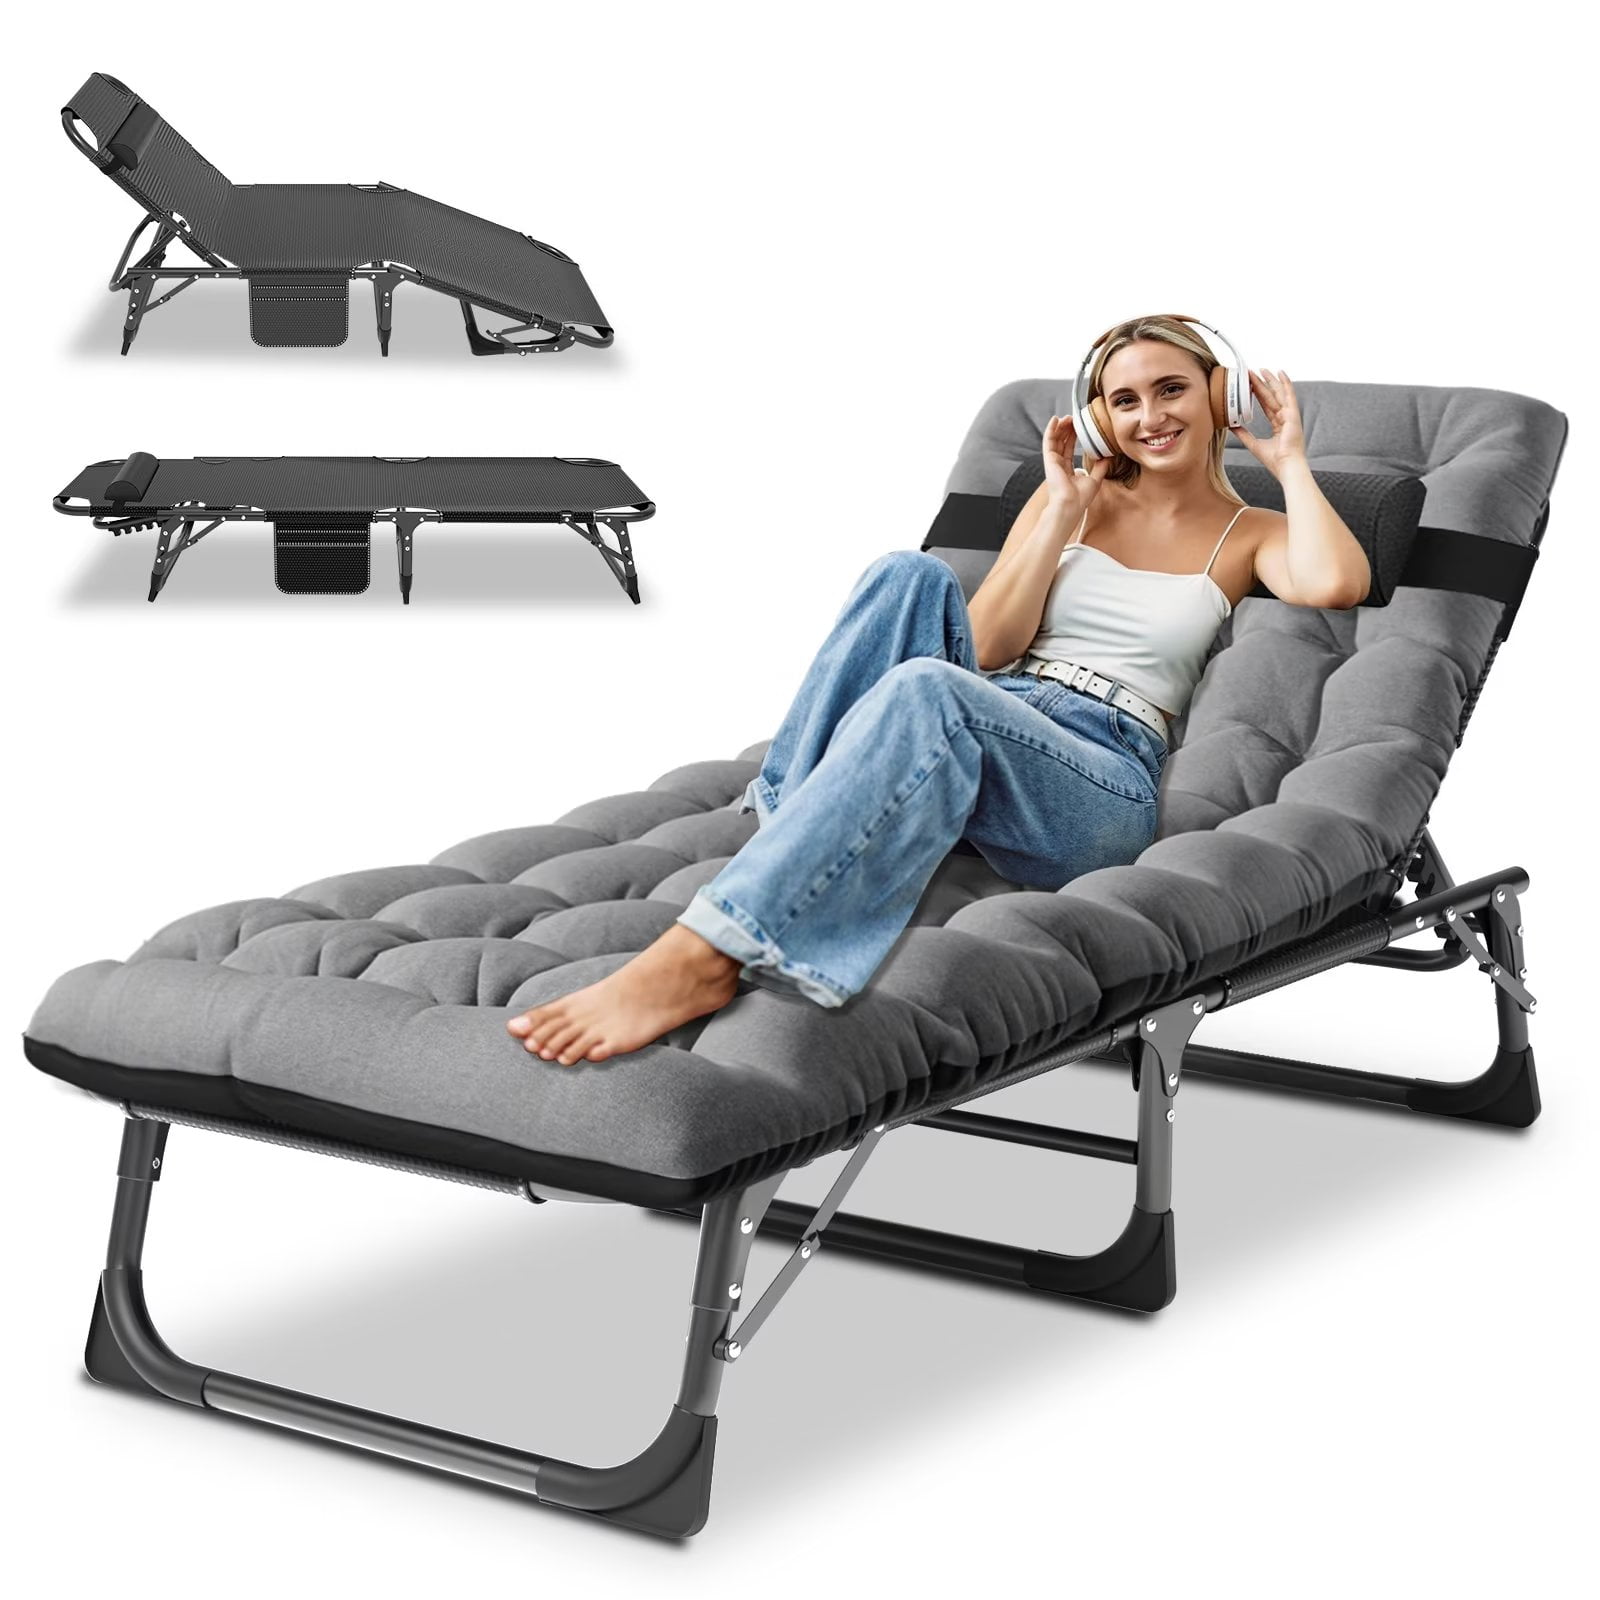 Fishing Camping Anglers Chair: Portable Reclining Bedchair with Pillow,  Outdoor Fishing Sleeping Cot Travel Office with Side Pocket and Adjustable